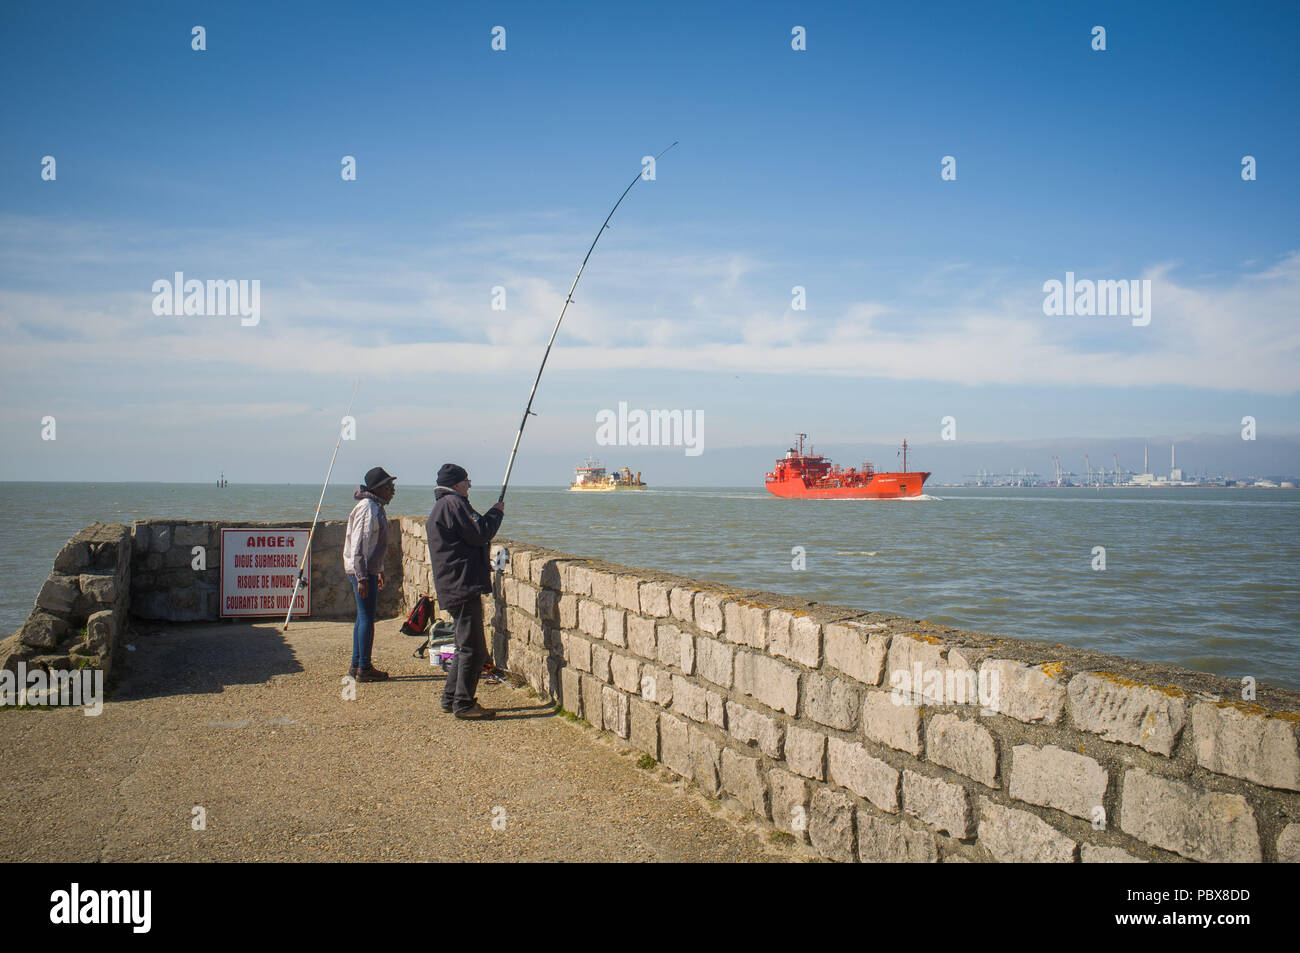 Two men fish from the quay at Honfleur as oil tankers pass in the Seine Estuary with Le Havre in the distance Stock Photo